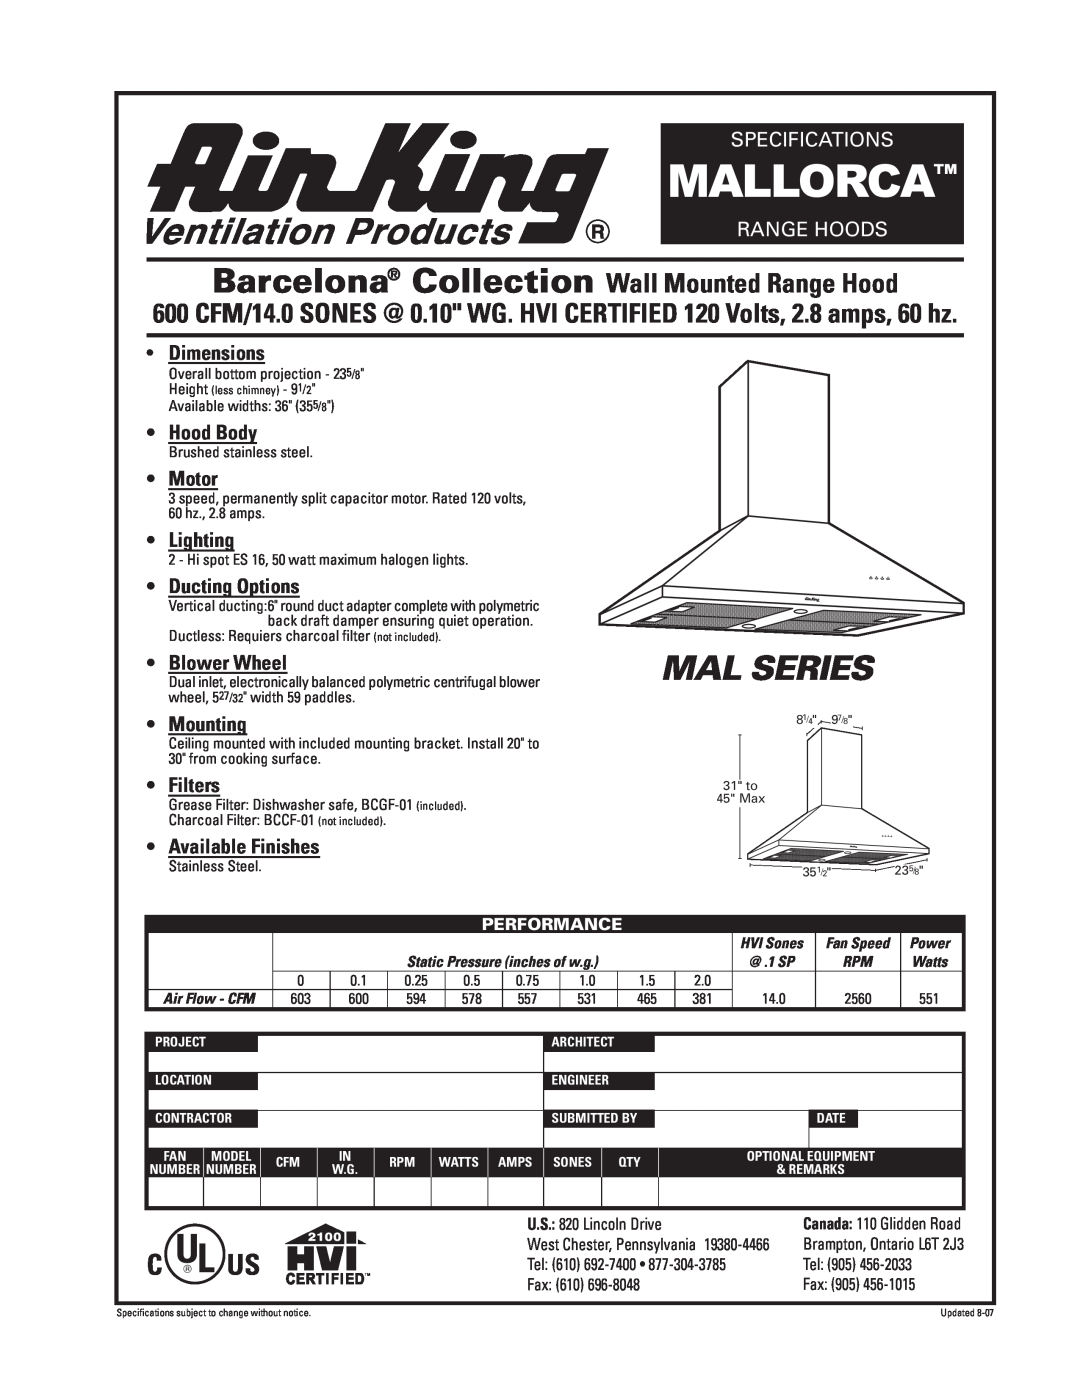 Air King MALLORCA specifications Mallorca, Mal Series, Barcelona Collection Wall Mounted Range Hood, Specifications, Motor 